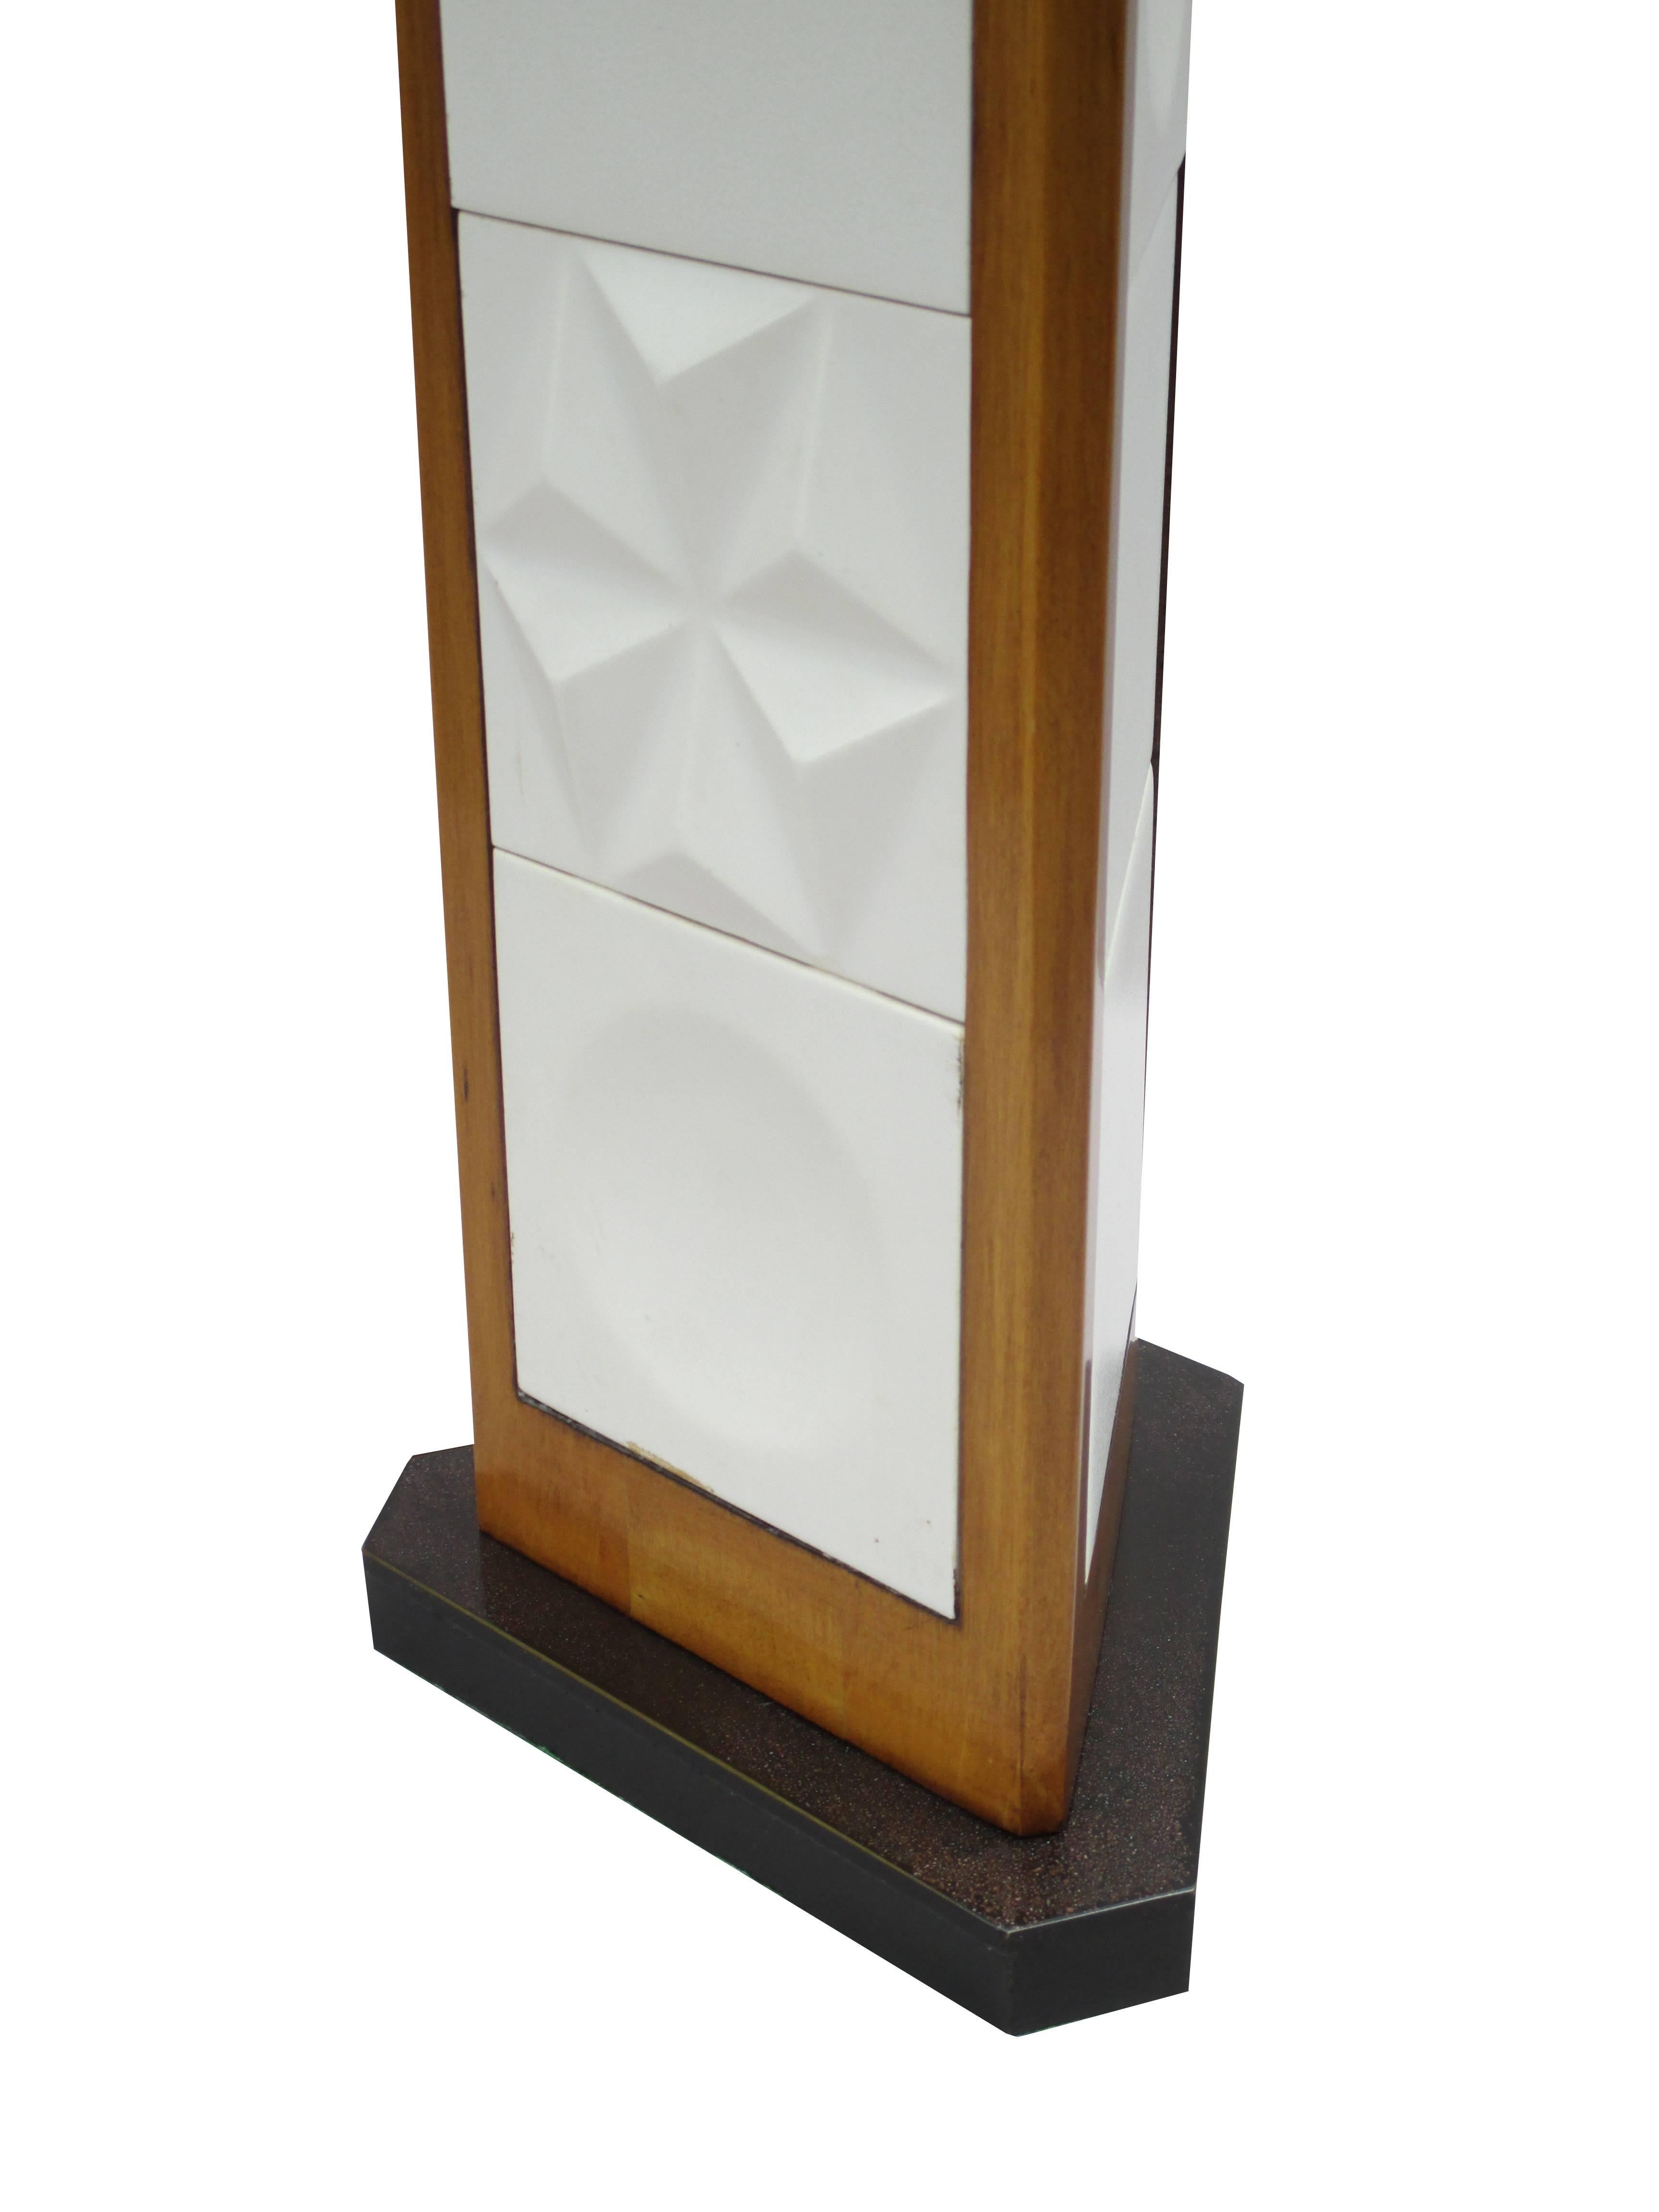 A pair of Modernist table lamps 
designed by George Nelson.
Triangular stem in walnut 
with matte white decorative ceramic tiles 
on a patinated bronze base.
Tiles also designed by George Nelson 
for the Pomona Tile Co. California.